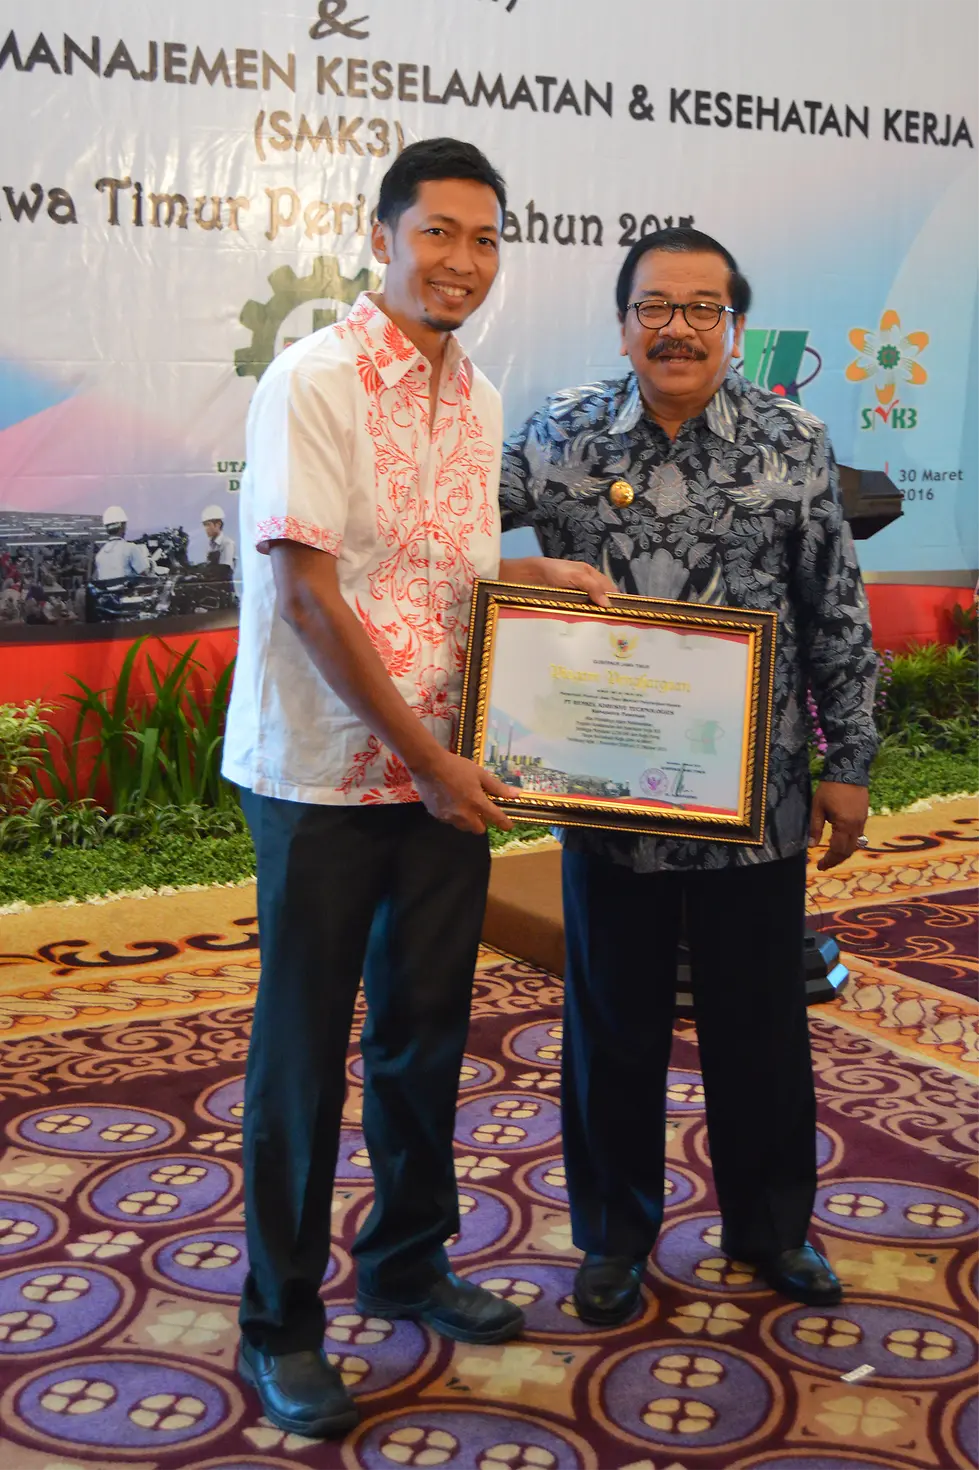 Dr. H. Soekarwo (right), Governor of East Java, presenting the award to Mashuri, Plant Manager, Adhesive Technologies, Henkel Indonesia.